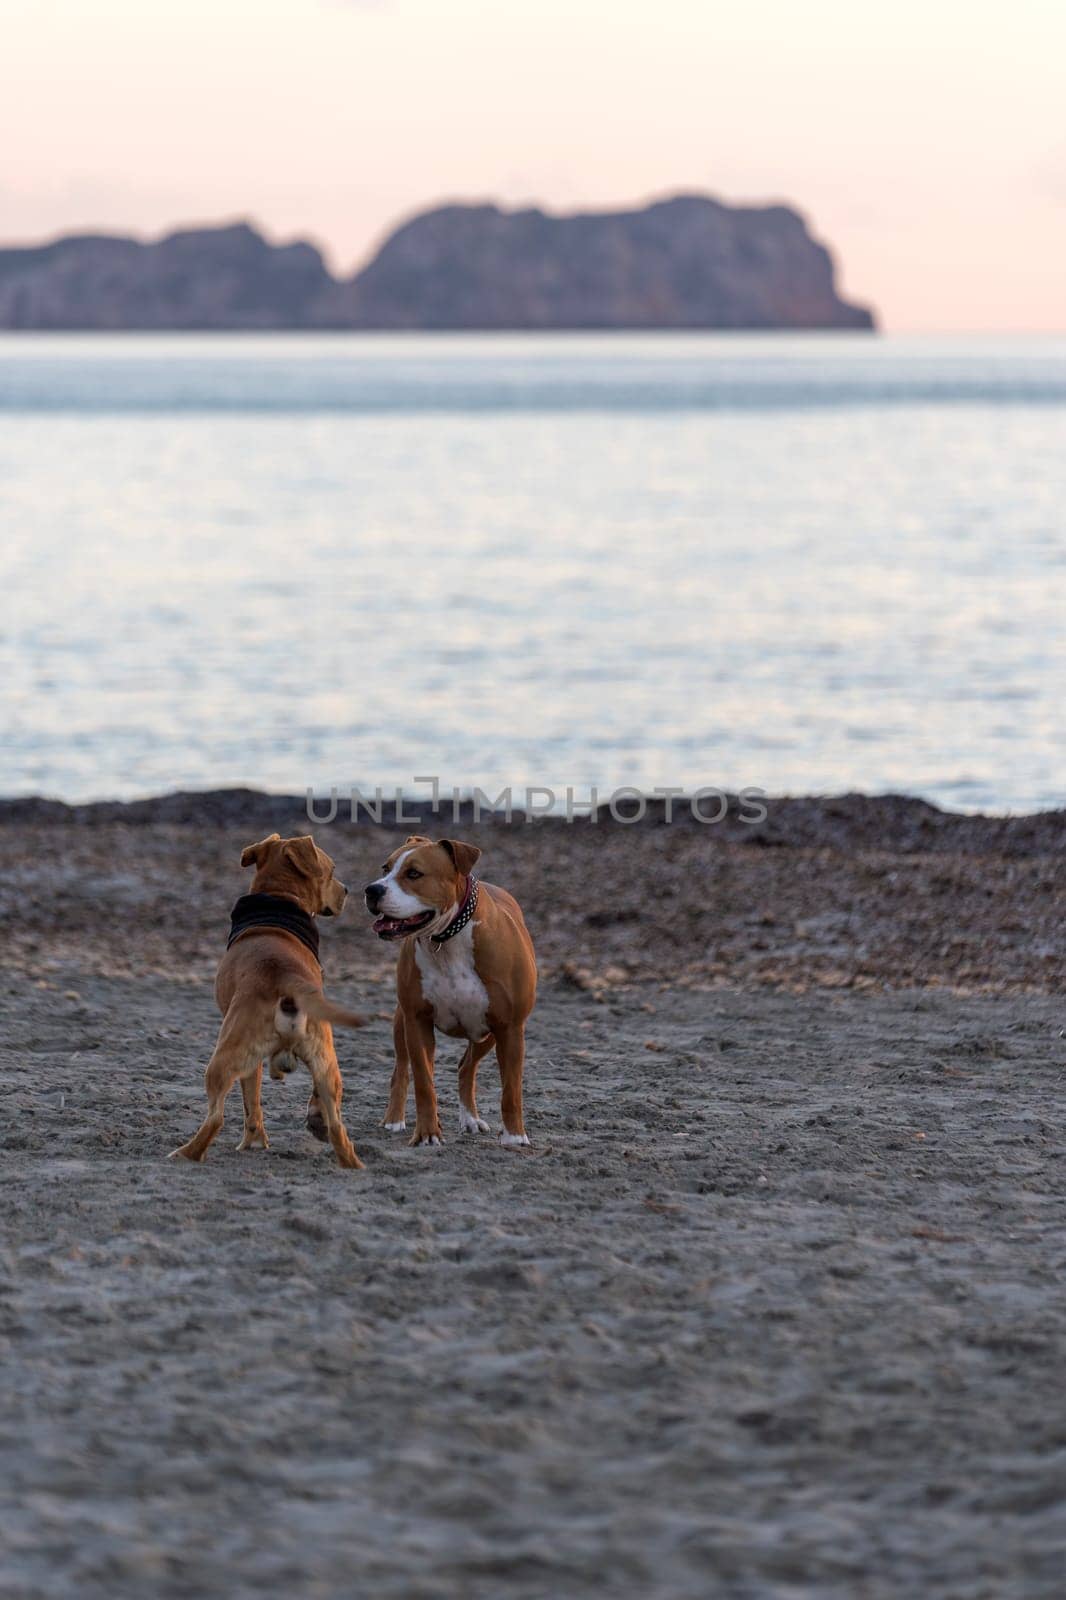 On a serene beach at dusk, two dogs share a moment of companionship with a majestic island silhouette in the background. The calm sea reflects the fading light, enhancing this peaceful encounter